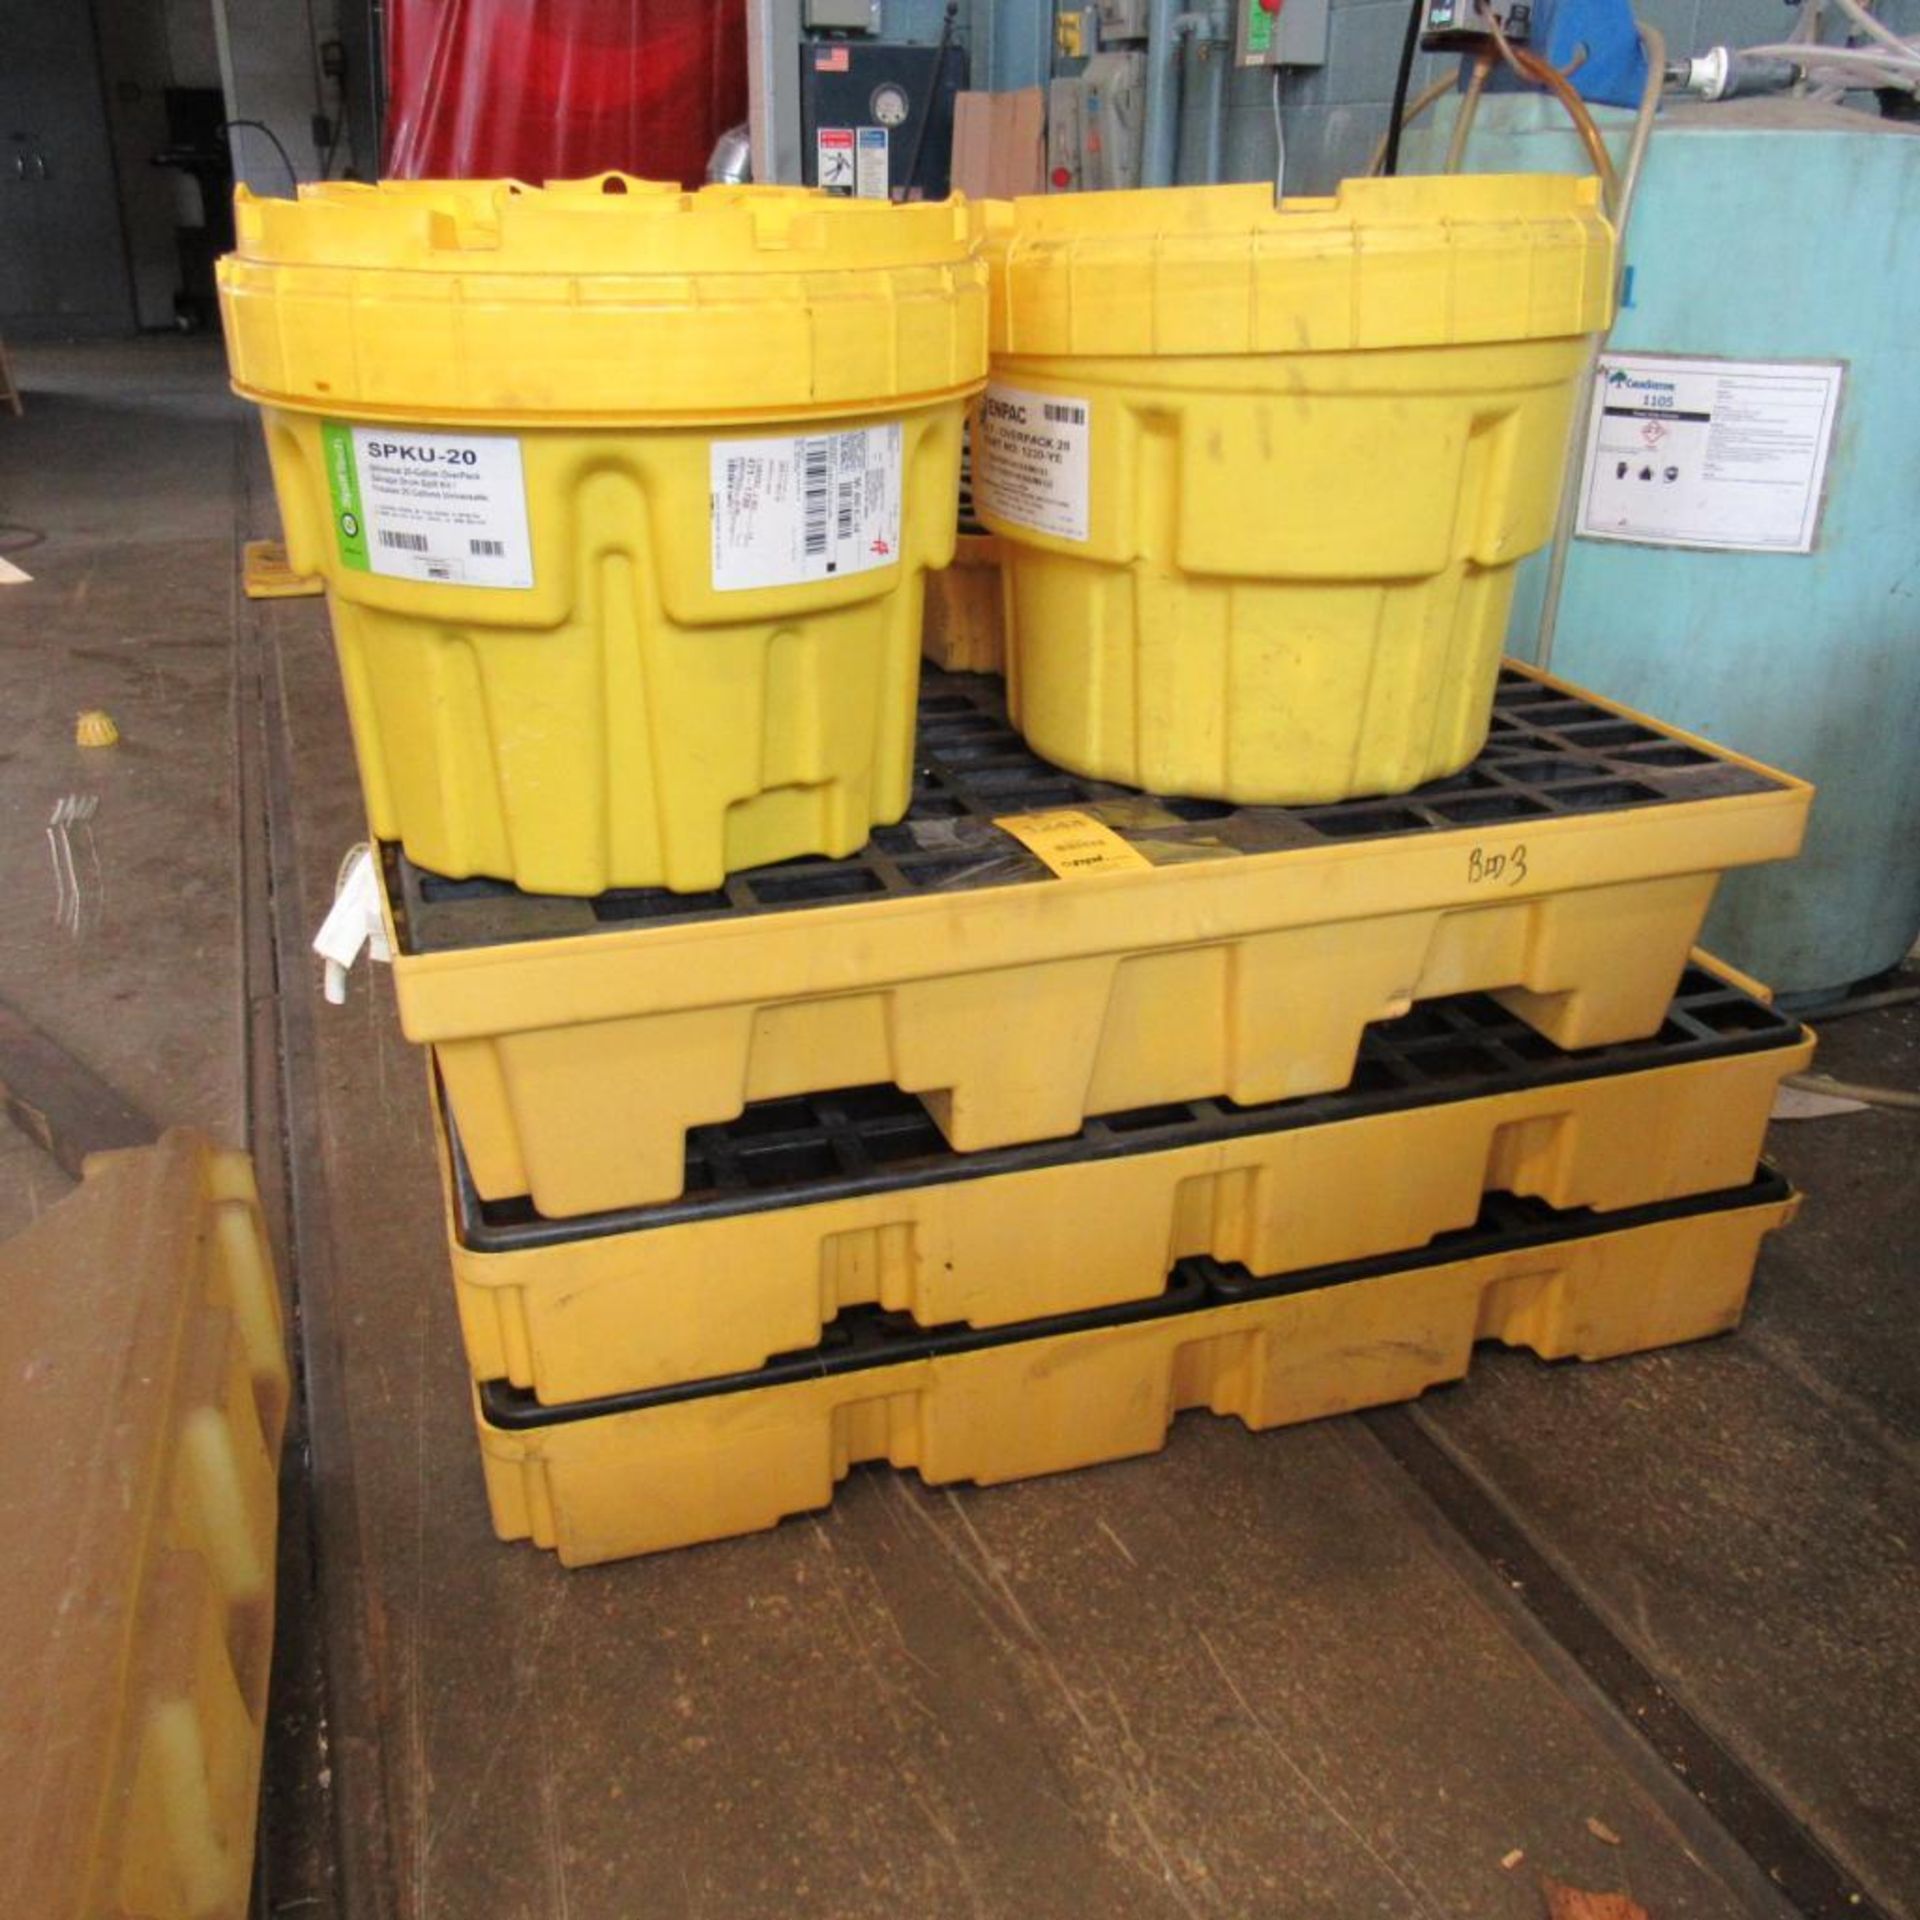 LOT: Spill Containment Kits & Bases (Location: Bldg. 3)